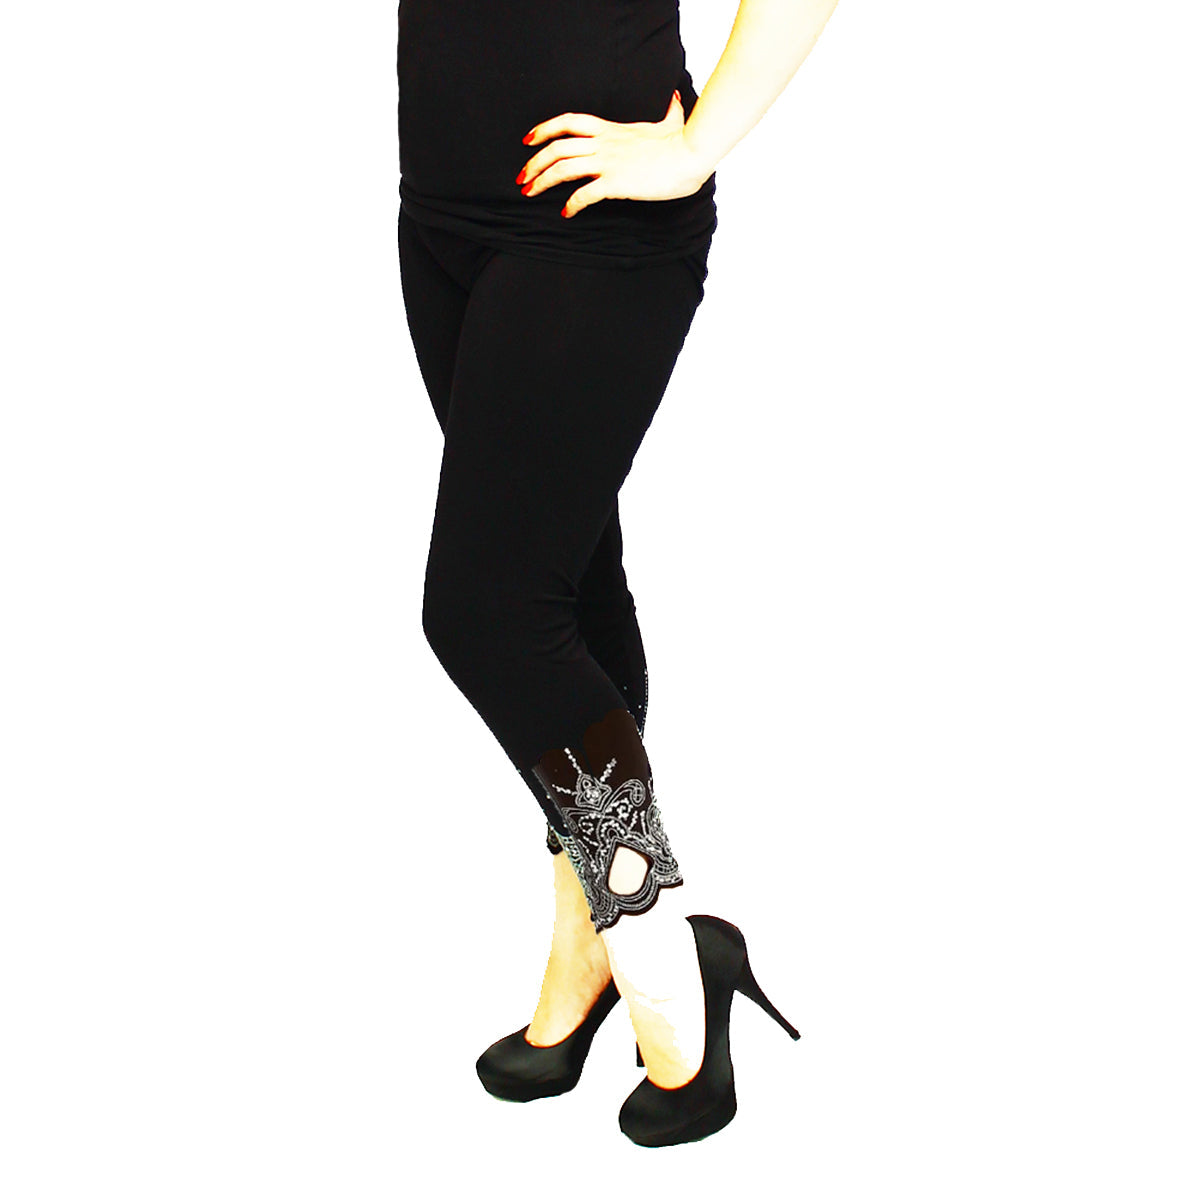 ROCKTHOSECURVES BLACK SOFT STRETCHY HIGH RISE LEGGINGS WITH SEQUIN CUT OUT HEM